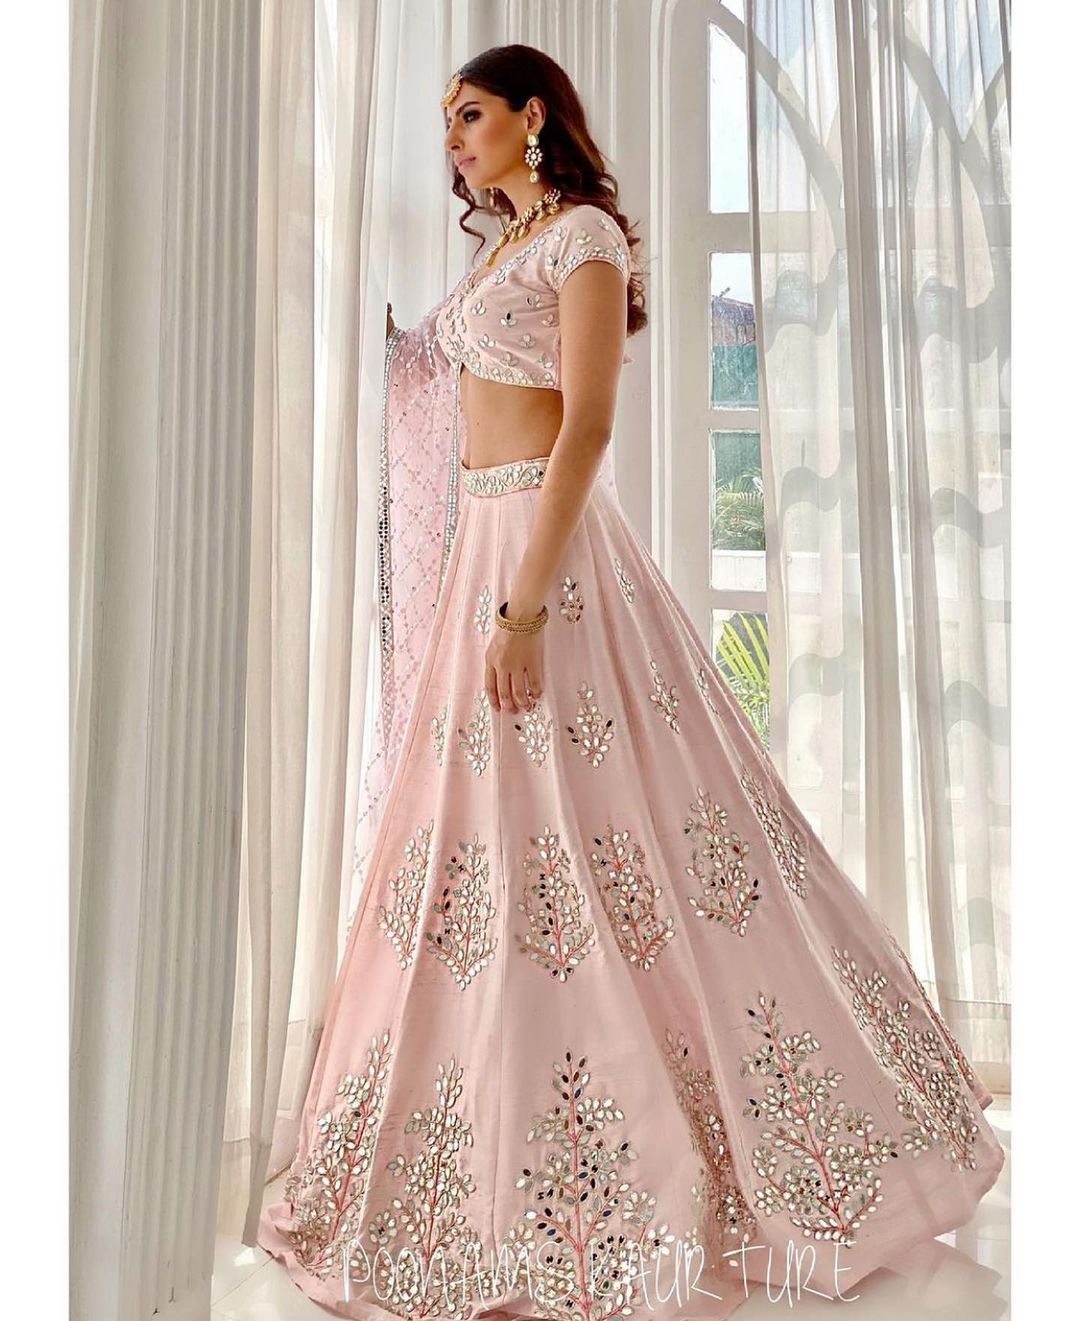 JAM NET SEQUINS, EMBROIDERY & THREAD-WORK PARTY-WEAR STYLISH LEHENGA CHOLI  @Indian Couture